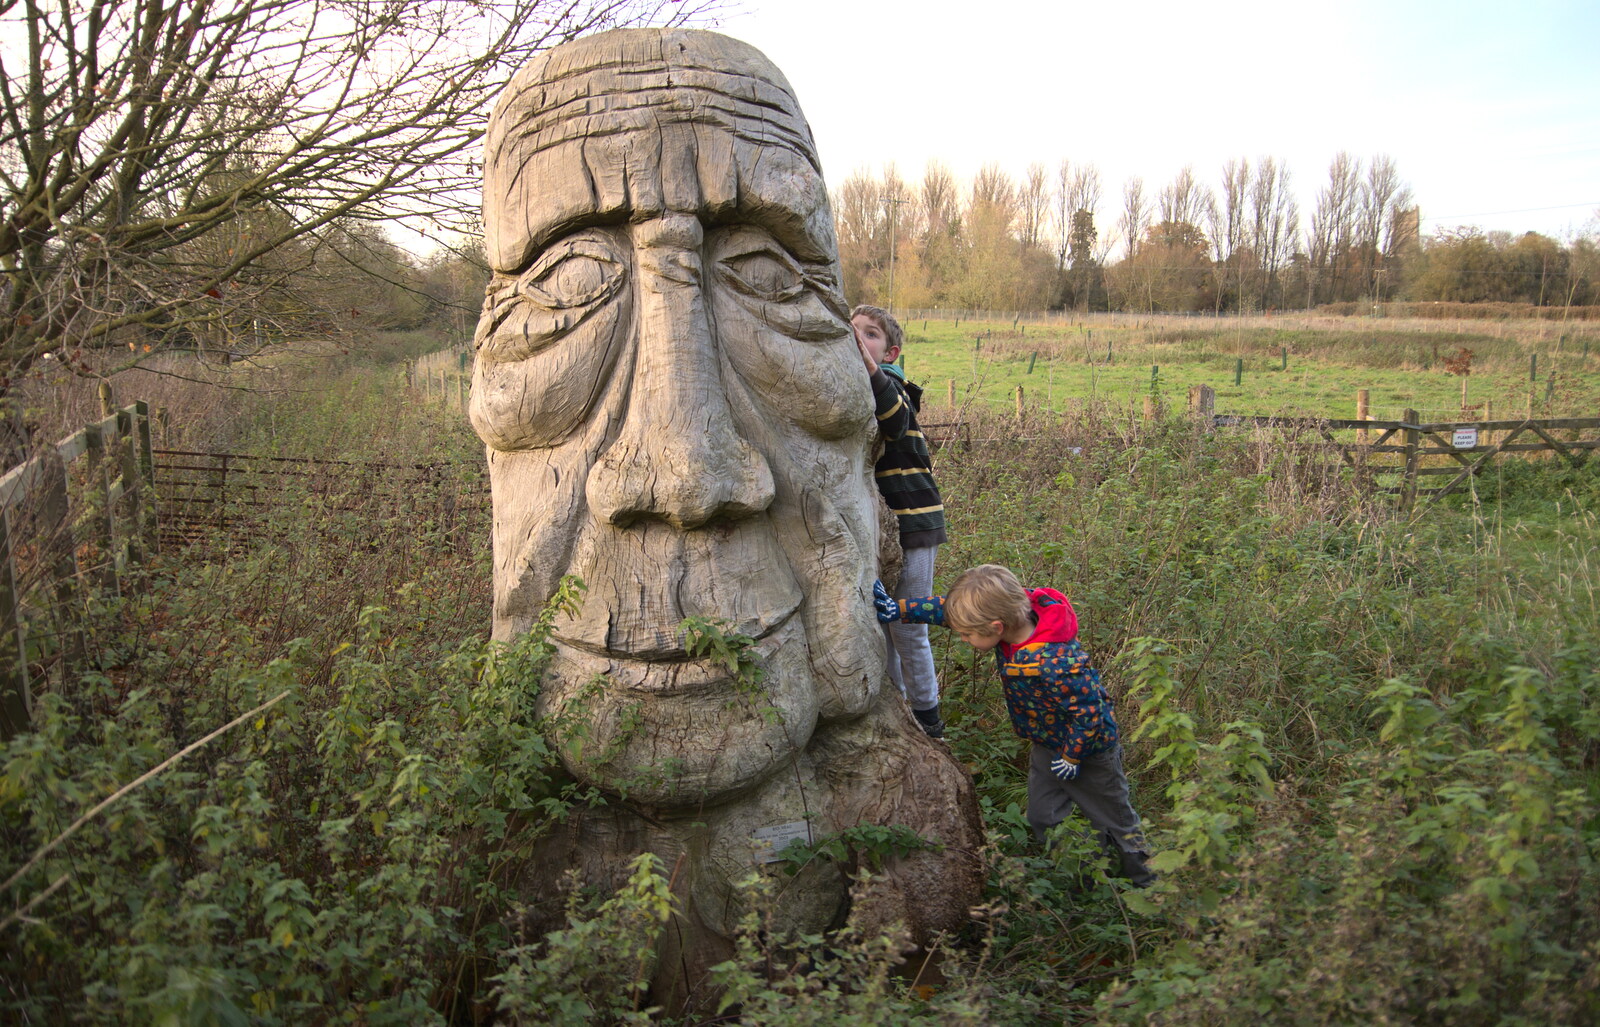 The boys say hello to the Big Giant Head from A Walk Around Eye, Suffolk - 19th November 2017